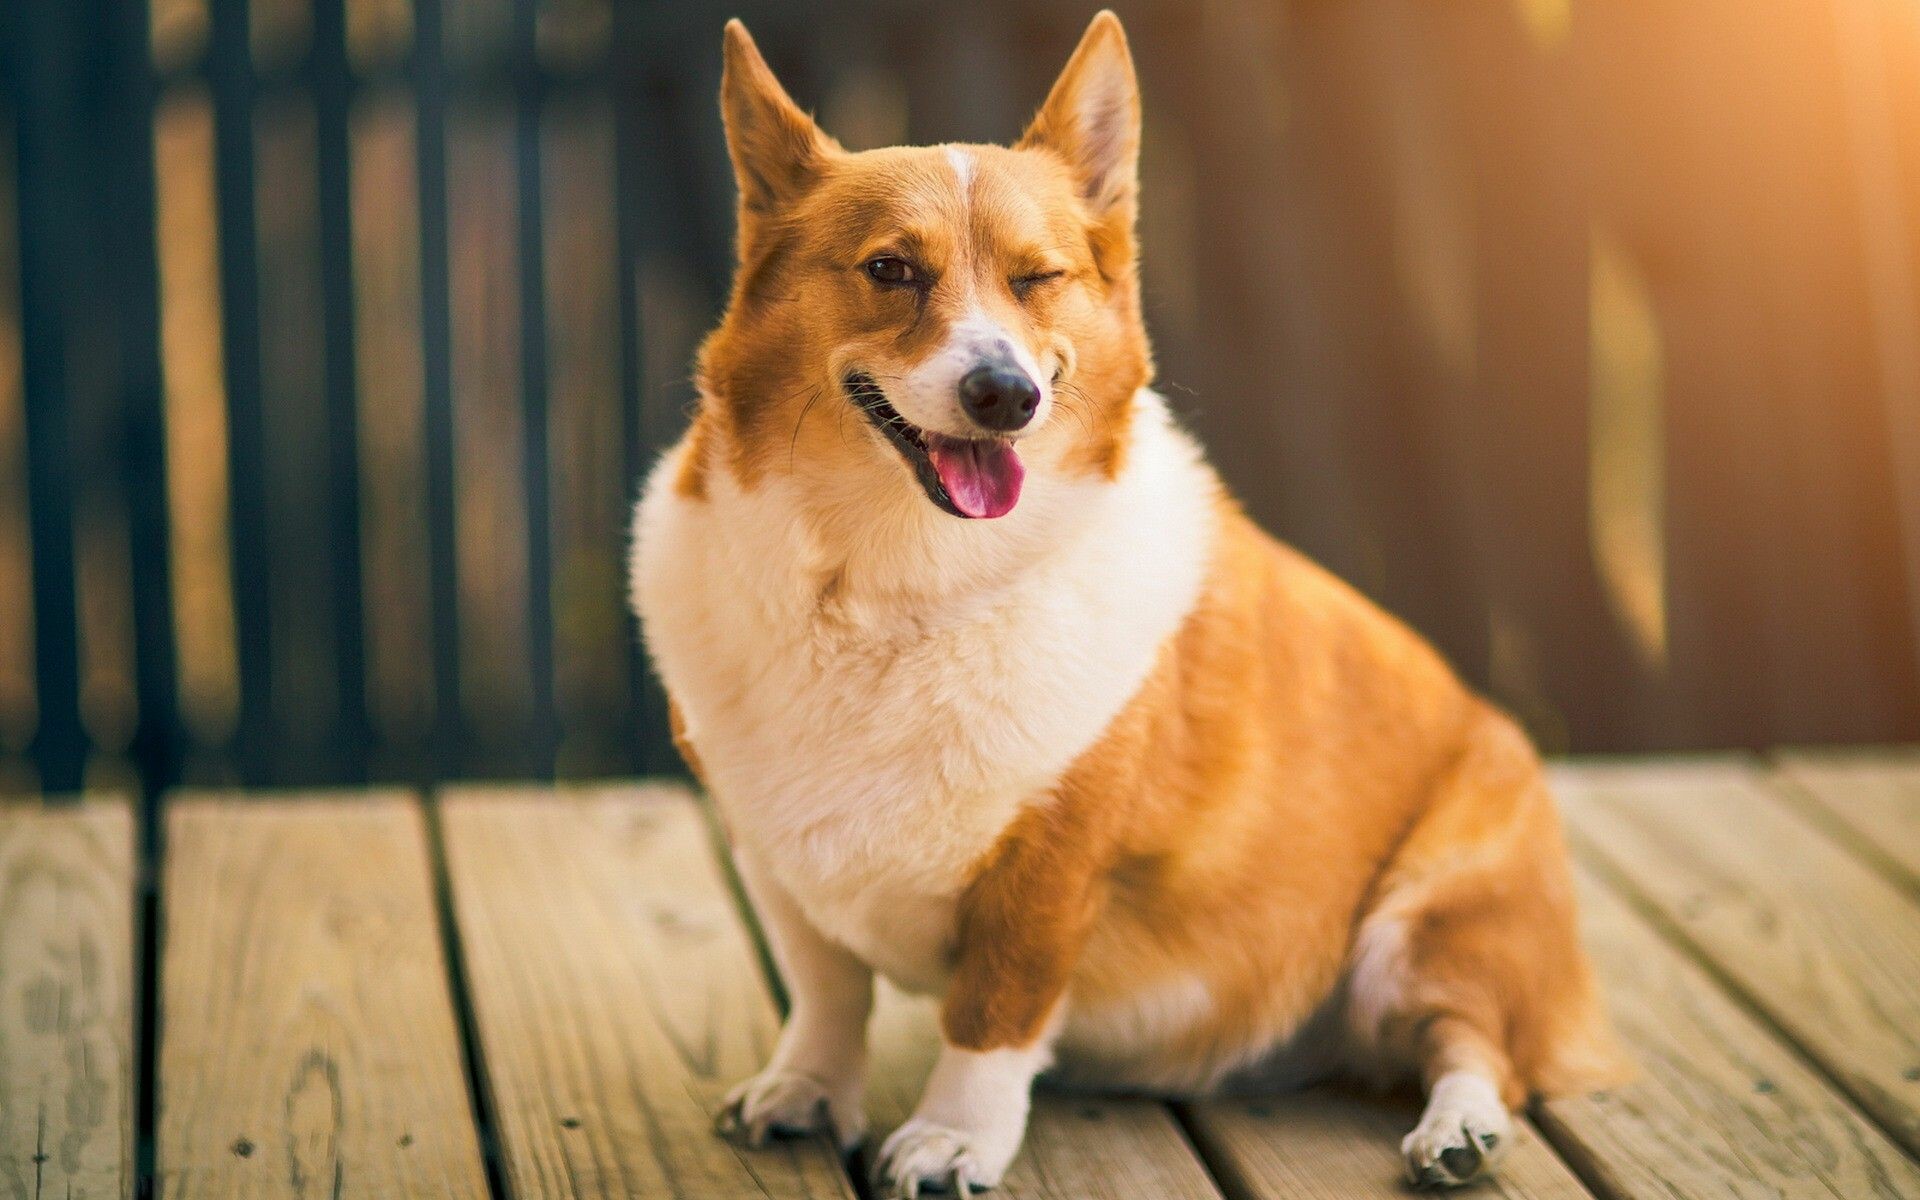 Corgi: Ranked 11th most popular breed of dog in 2020 according to the American Kennel Club. 1920x1200 HD Wallpaper.